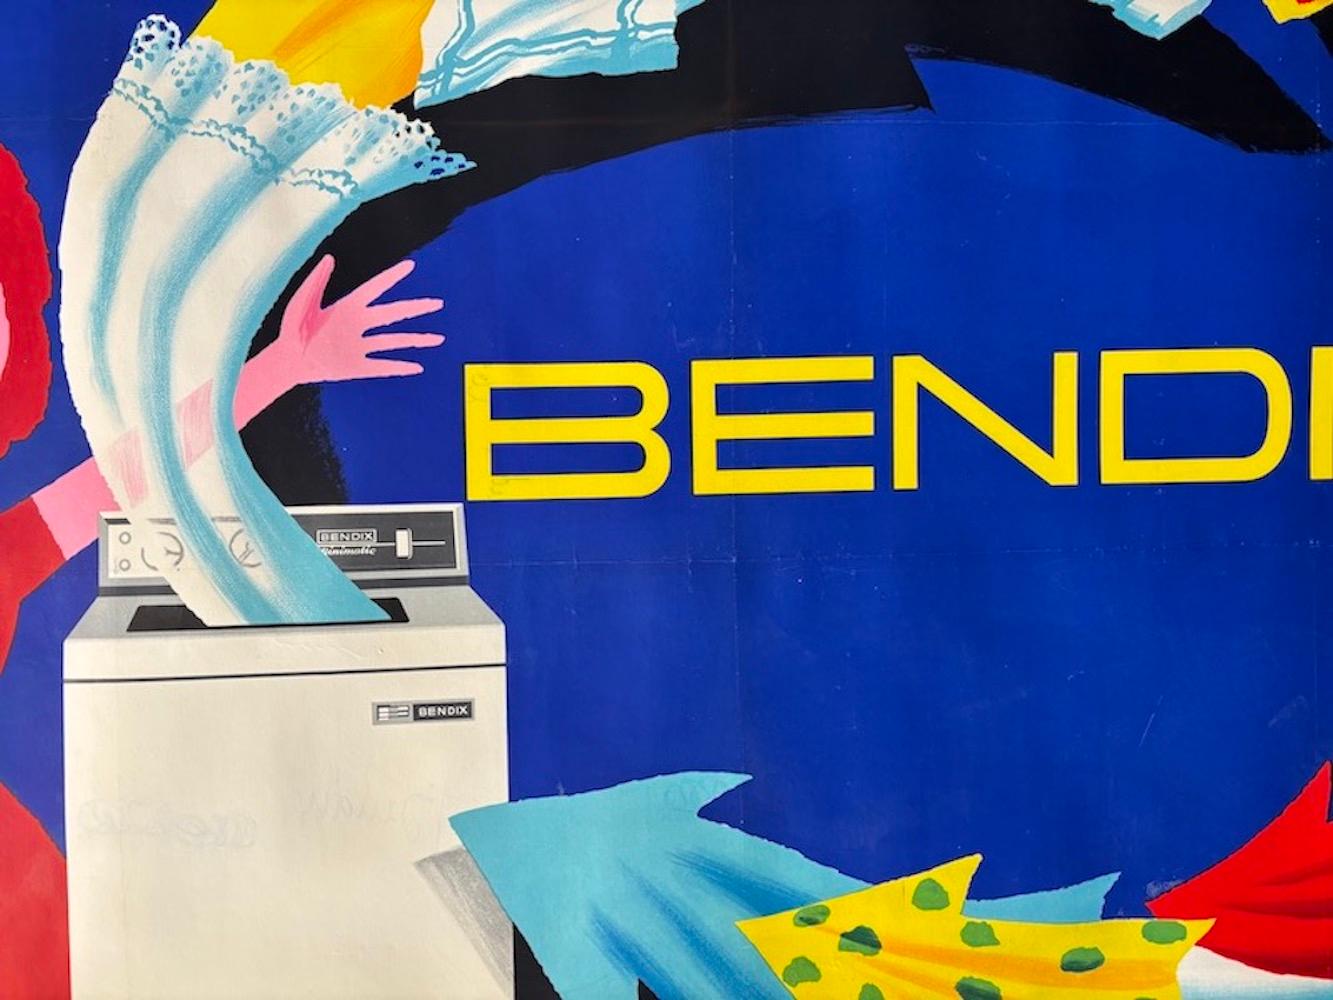 Mid-Century Original French Advertising Poster, 'BENDIX' by H. MORVAN, 1965

This poster was designed by Herve Morvan to help promote the domestic electric washing machine. This washing is an example of a popular brand of the 1950s and one of the